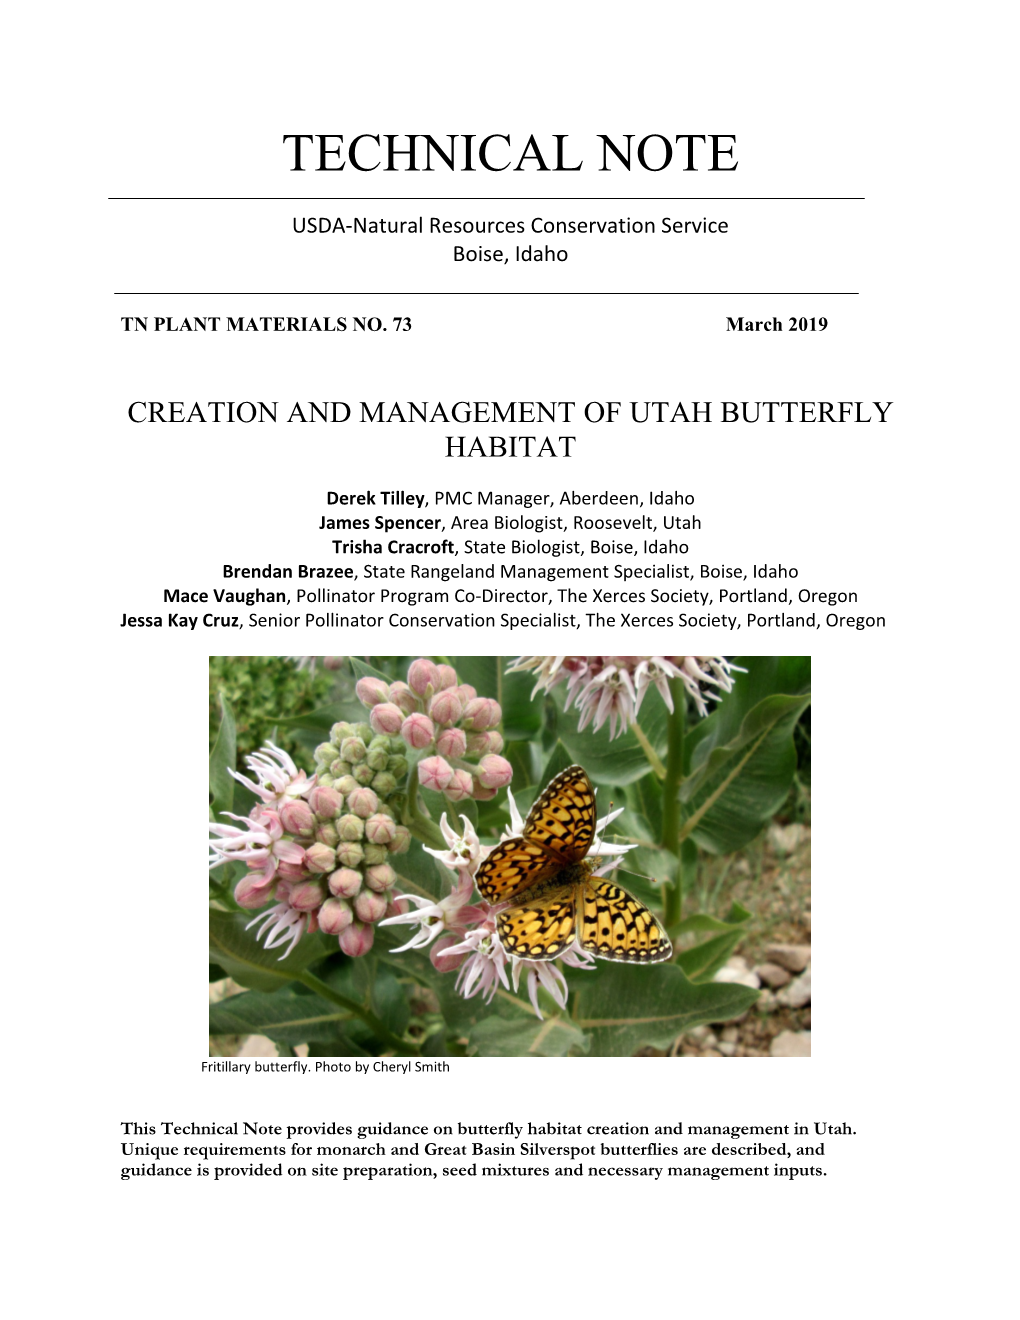 Creation and Management of Utah Butterfly Habitat